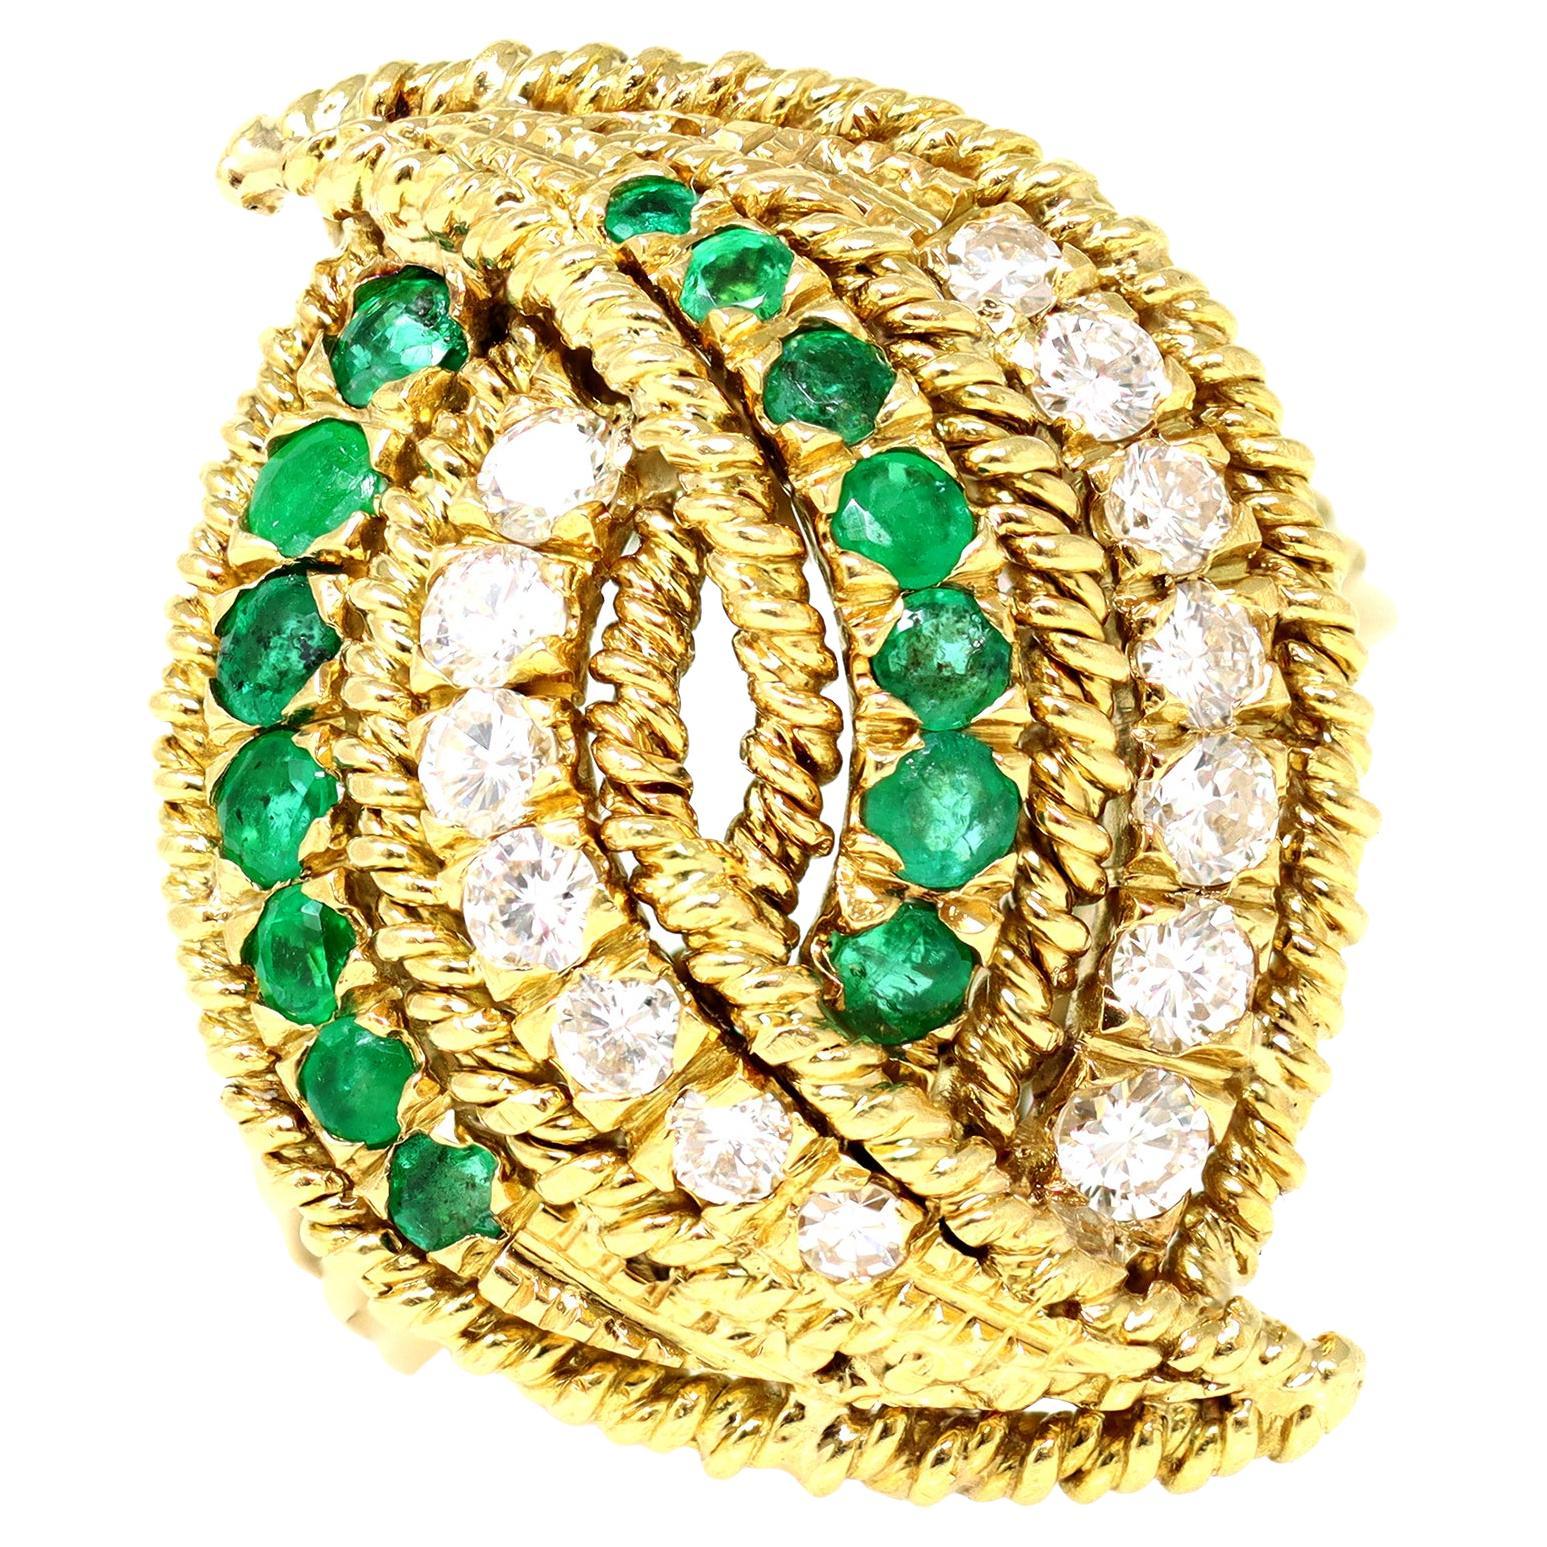 Emerald and Diamond Cocktail Ring Set in 18k Yellow Gold